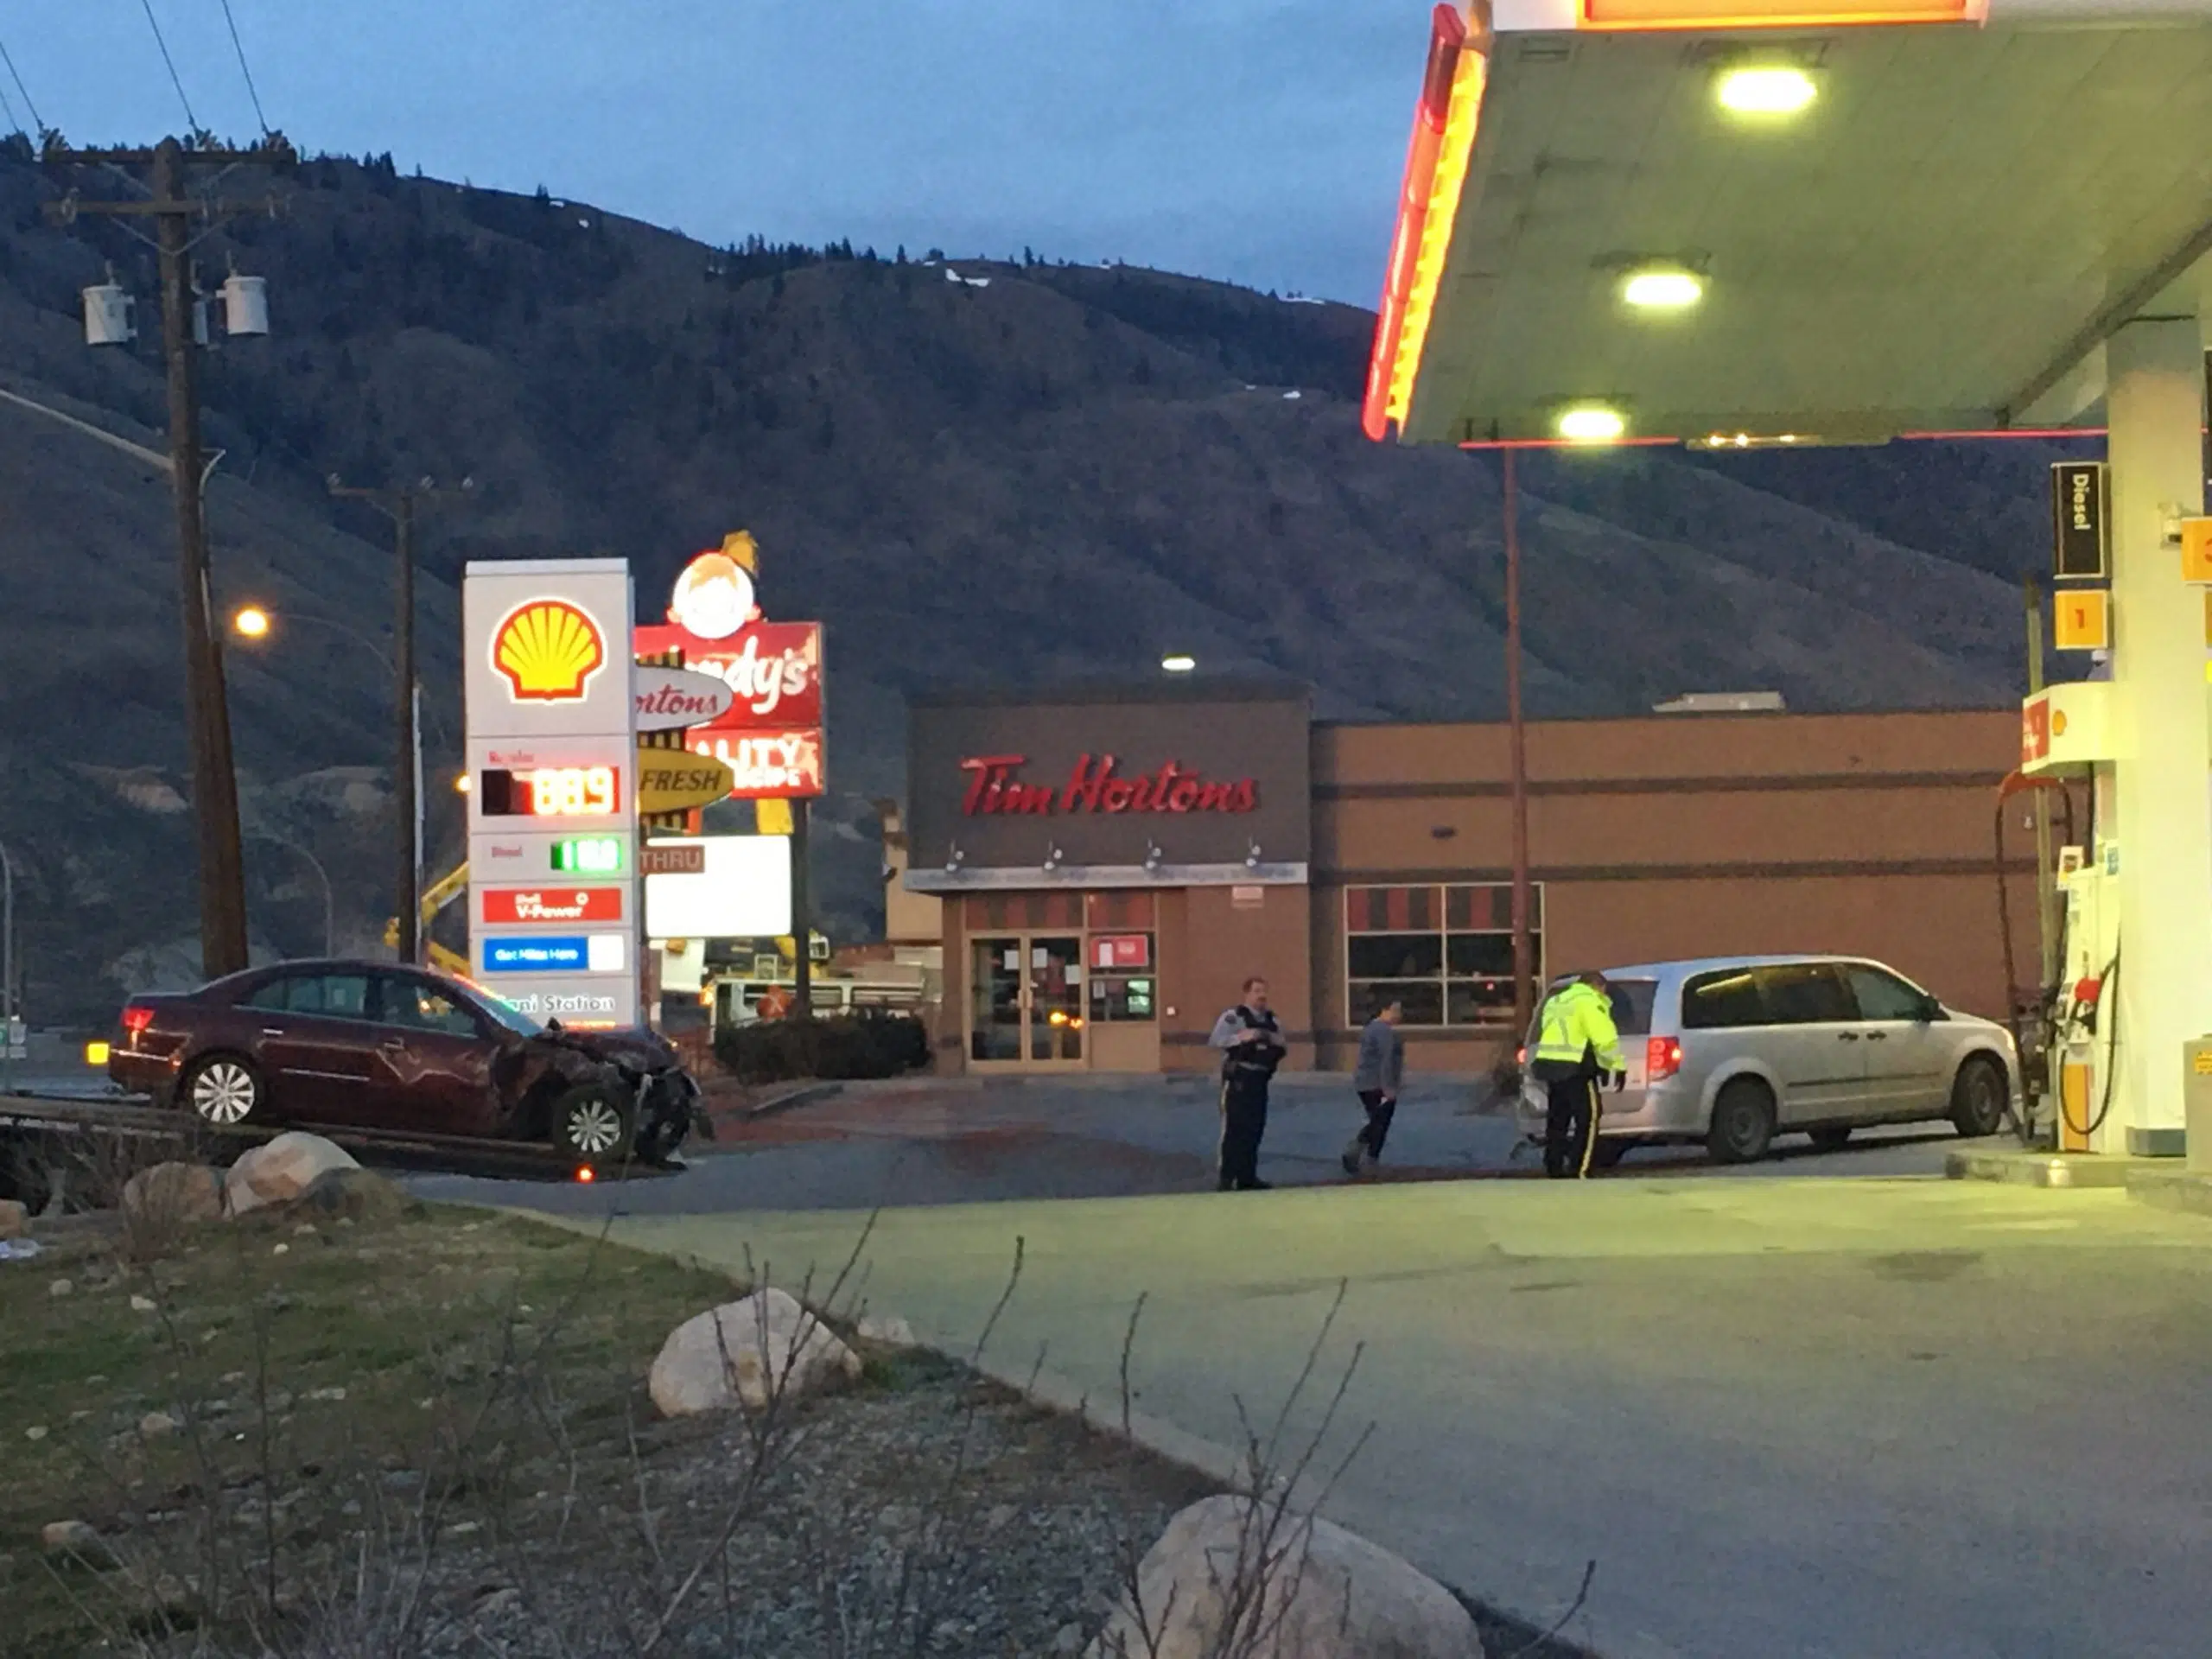 Driver killed after medical event behind the wheel, leading to crash at Shell gas station in Valleyview